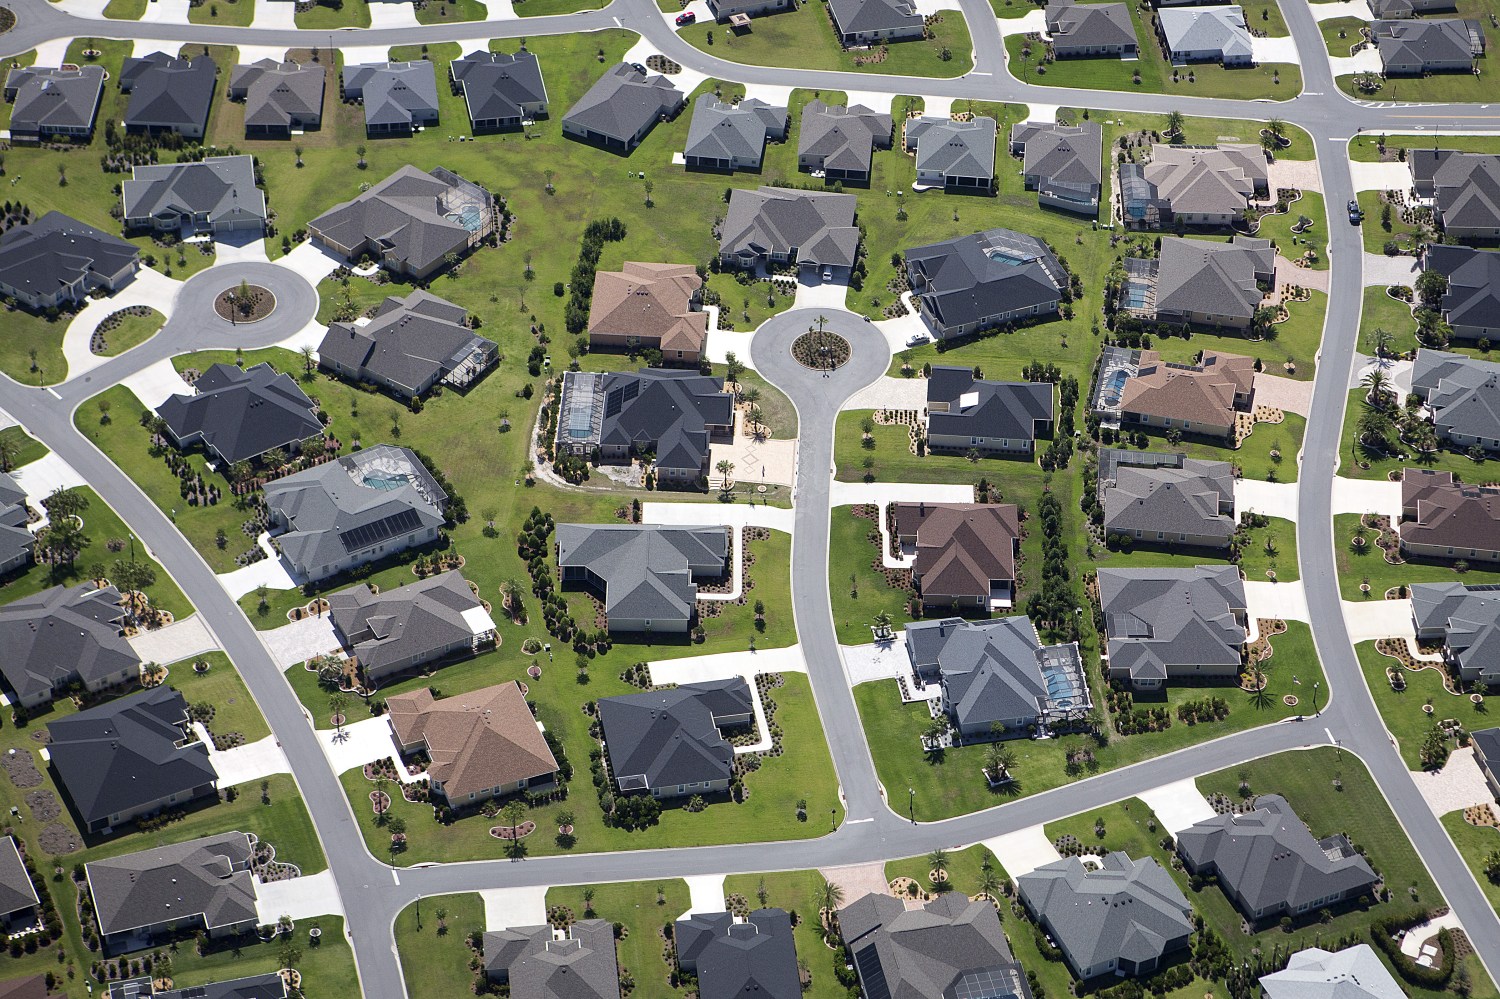 An aerial view of The Villages retirement community in Central Florida, June 27, 2015. The Villages has been the fastest growing metro area in the nation for two years running, more than doubling its population to 114,000 since 2010, according to the latest figures from the U.S. Census Bureau.    REUTERS/Carlo AllegriPICTURE 2 OF 18 FOR WIDER IMAGE STORY "THE VILLAGES"SEARCH "CARLO VILLAGES" FOR ALL IMAGES - GF10000226080